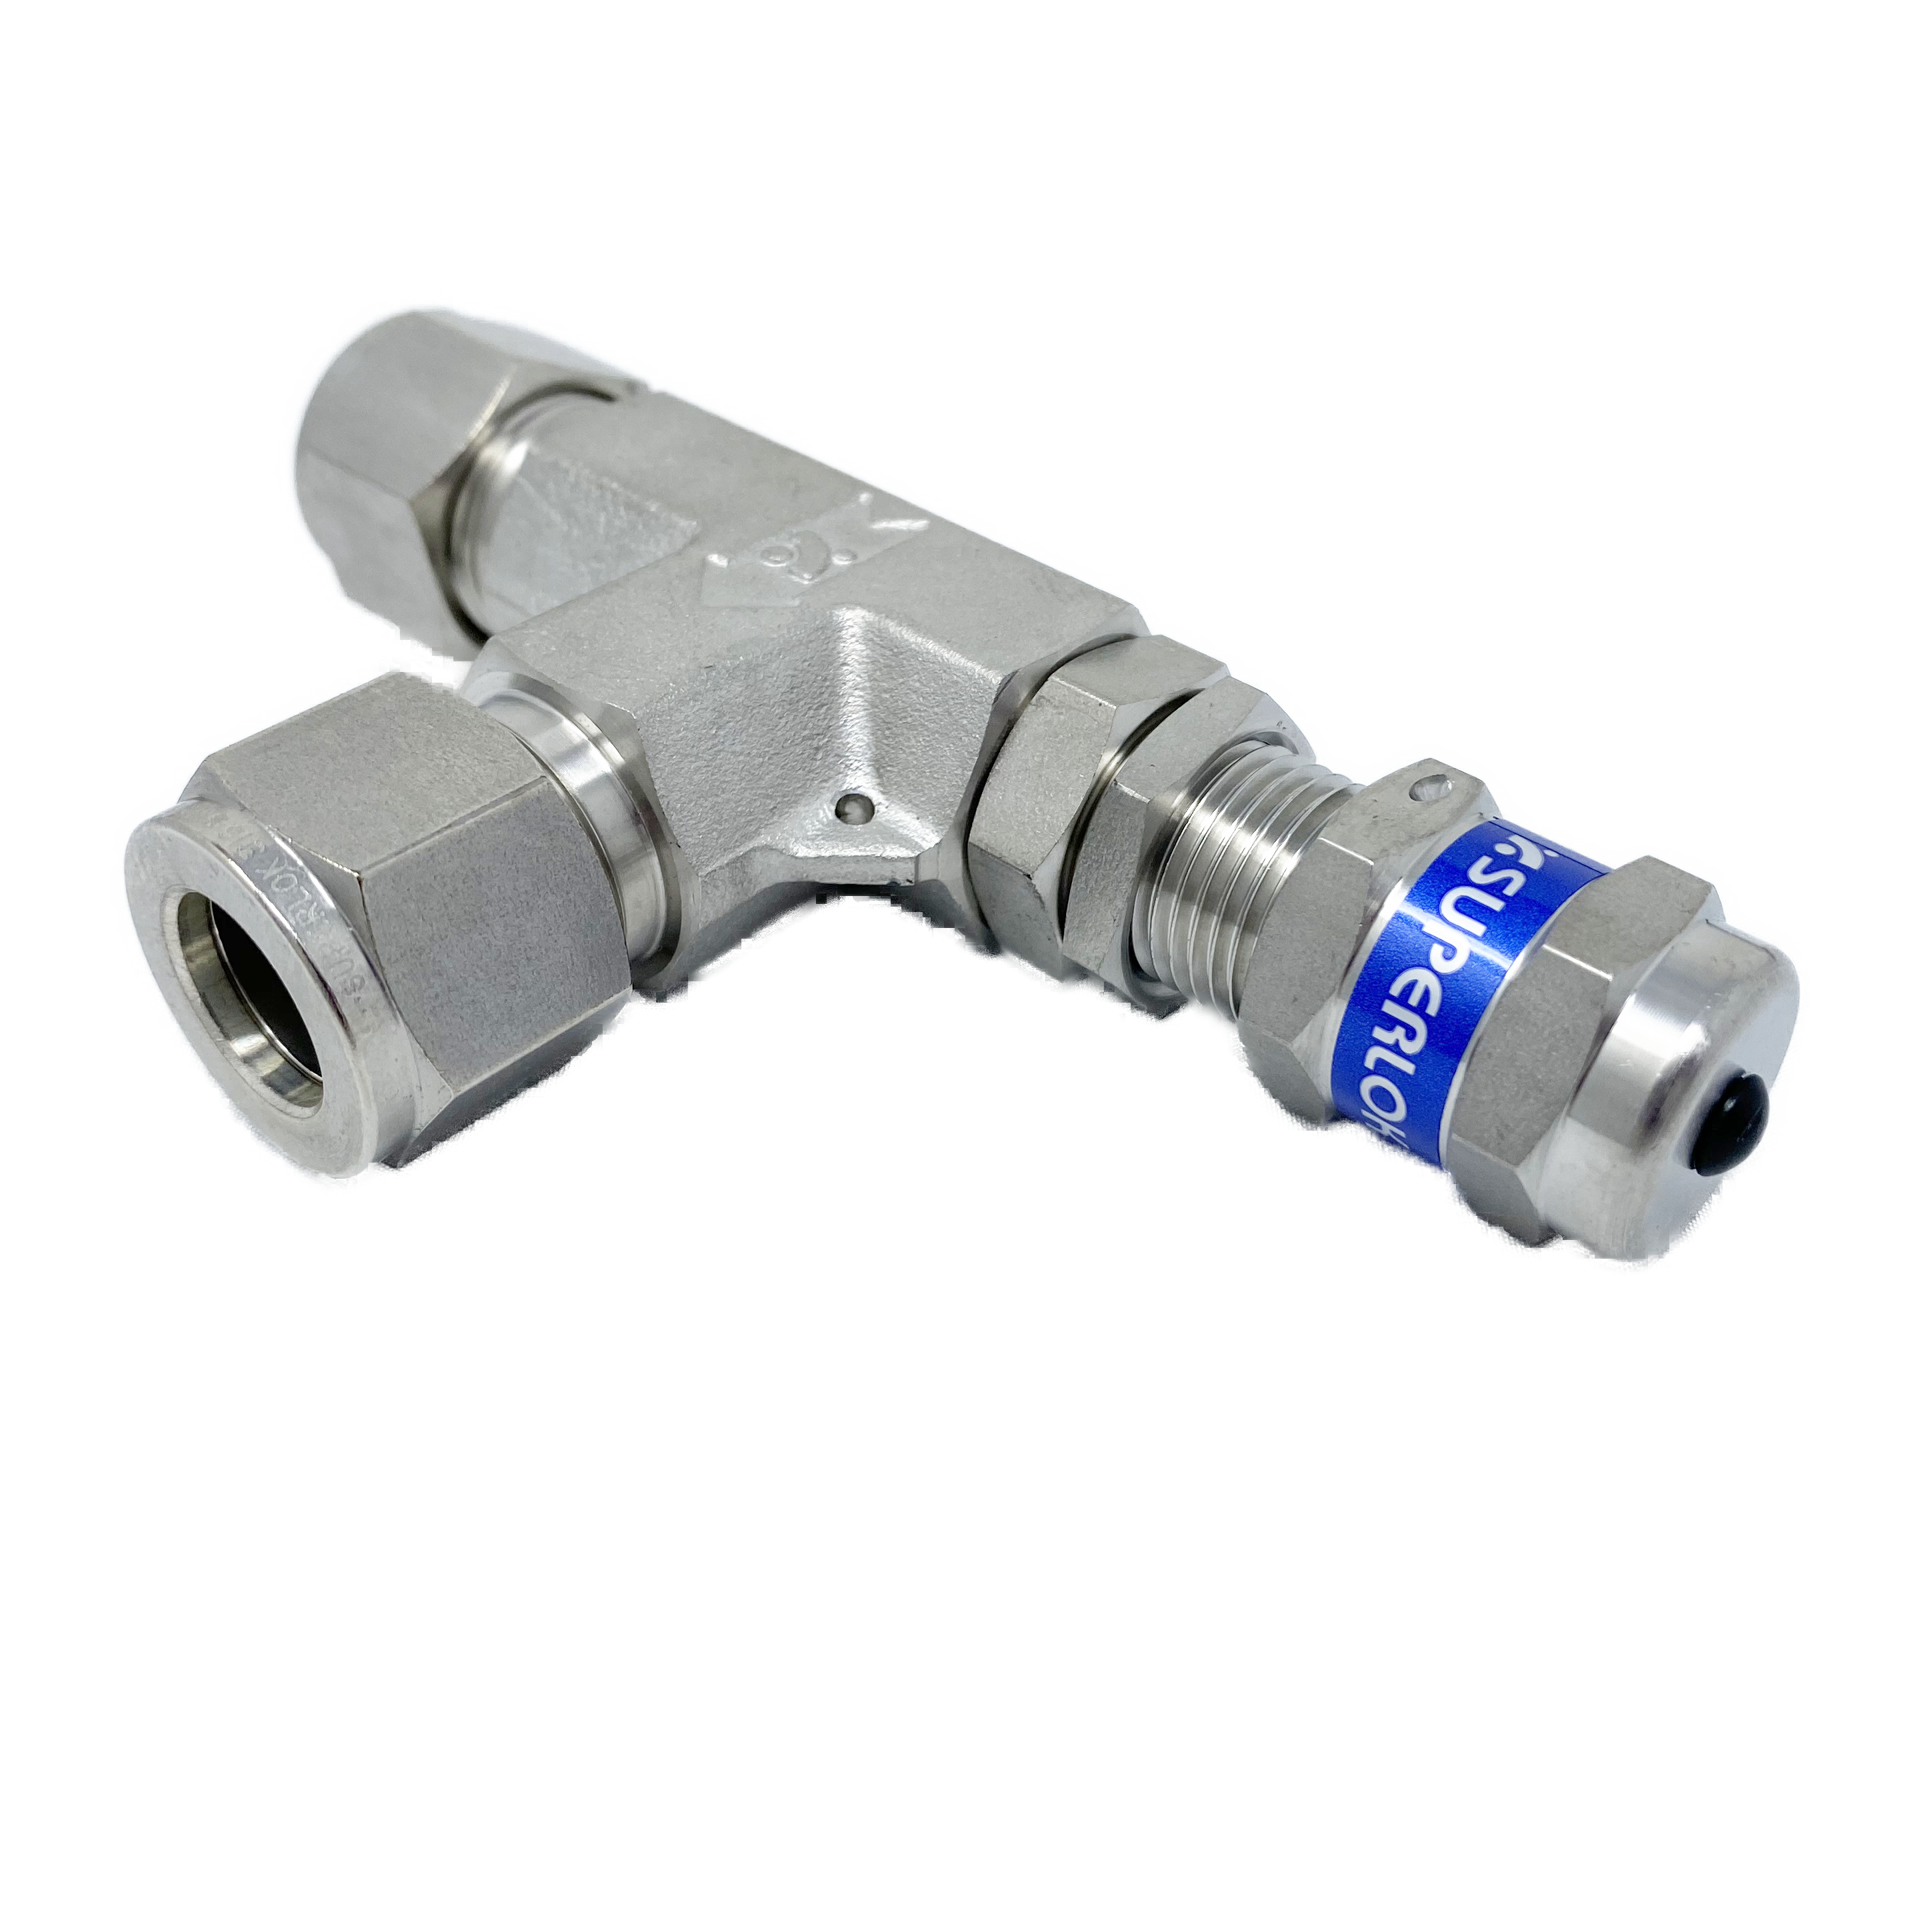 SRVL-S-6-N : Superlok Inline Relief Valve, 1/4" O.D. Tube, Angle Pattern, Buna N O-Ring, 300psi, 316SS, No Spring